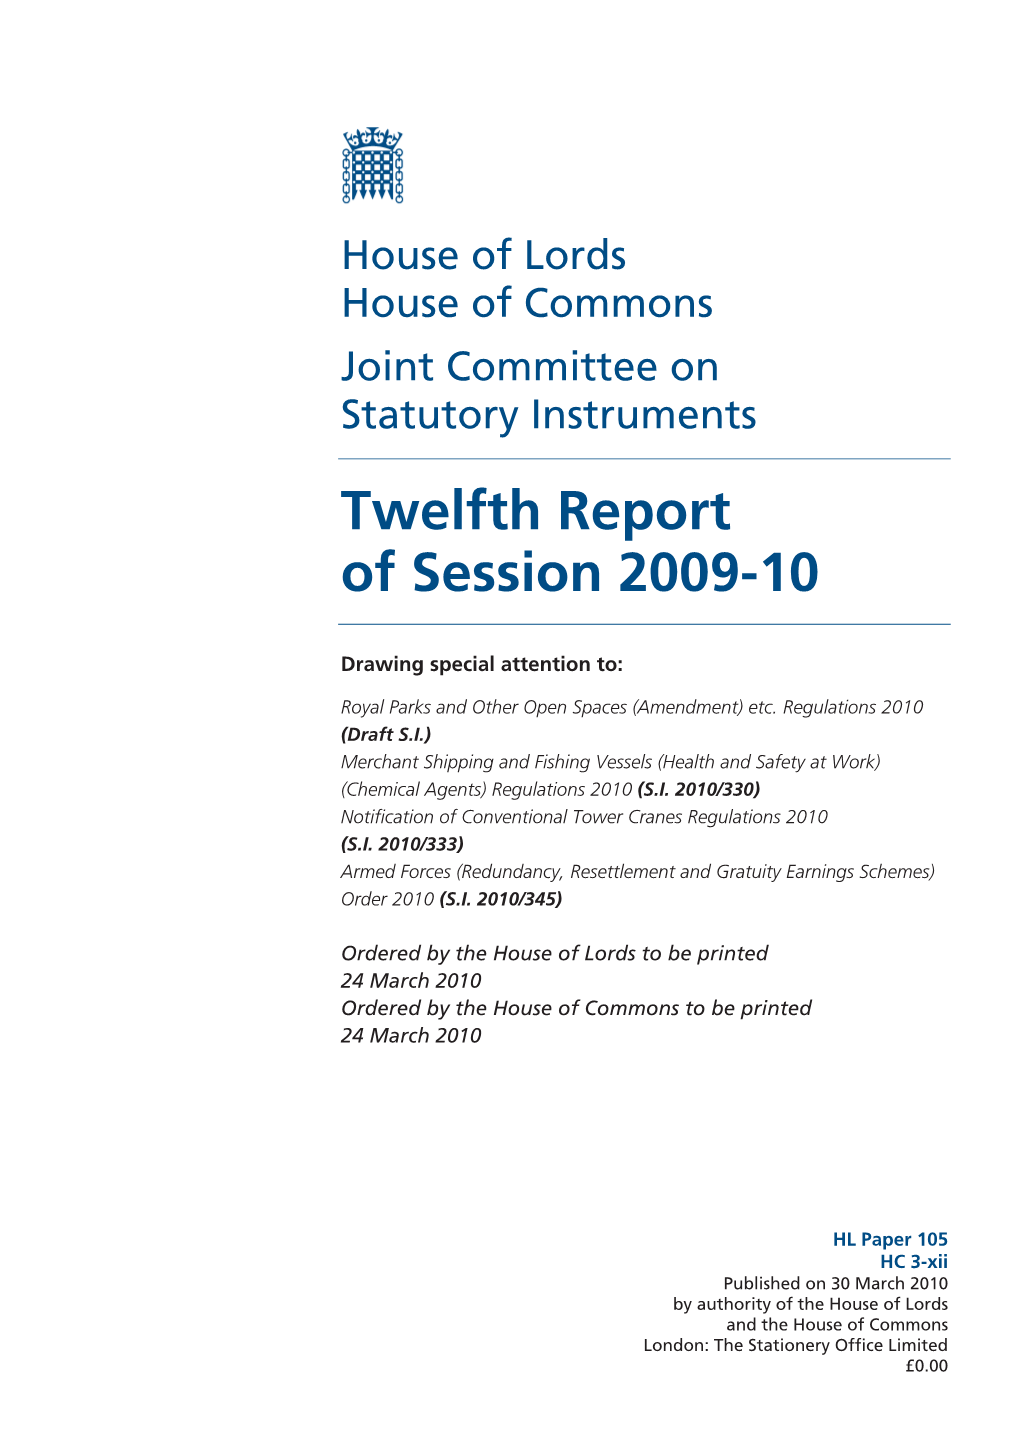 Twelfth Report of Session 2009-10